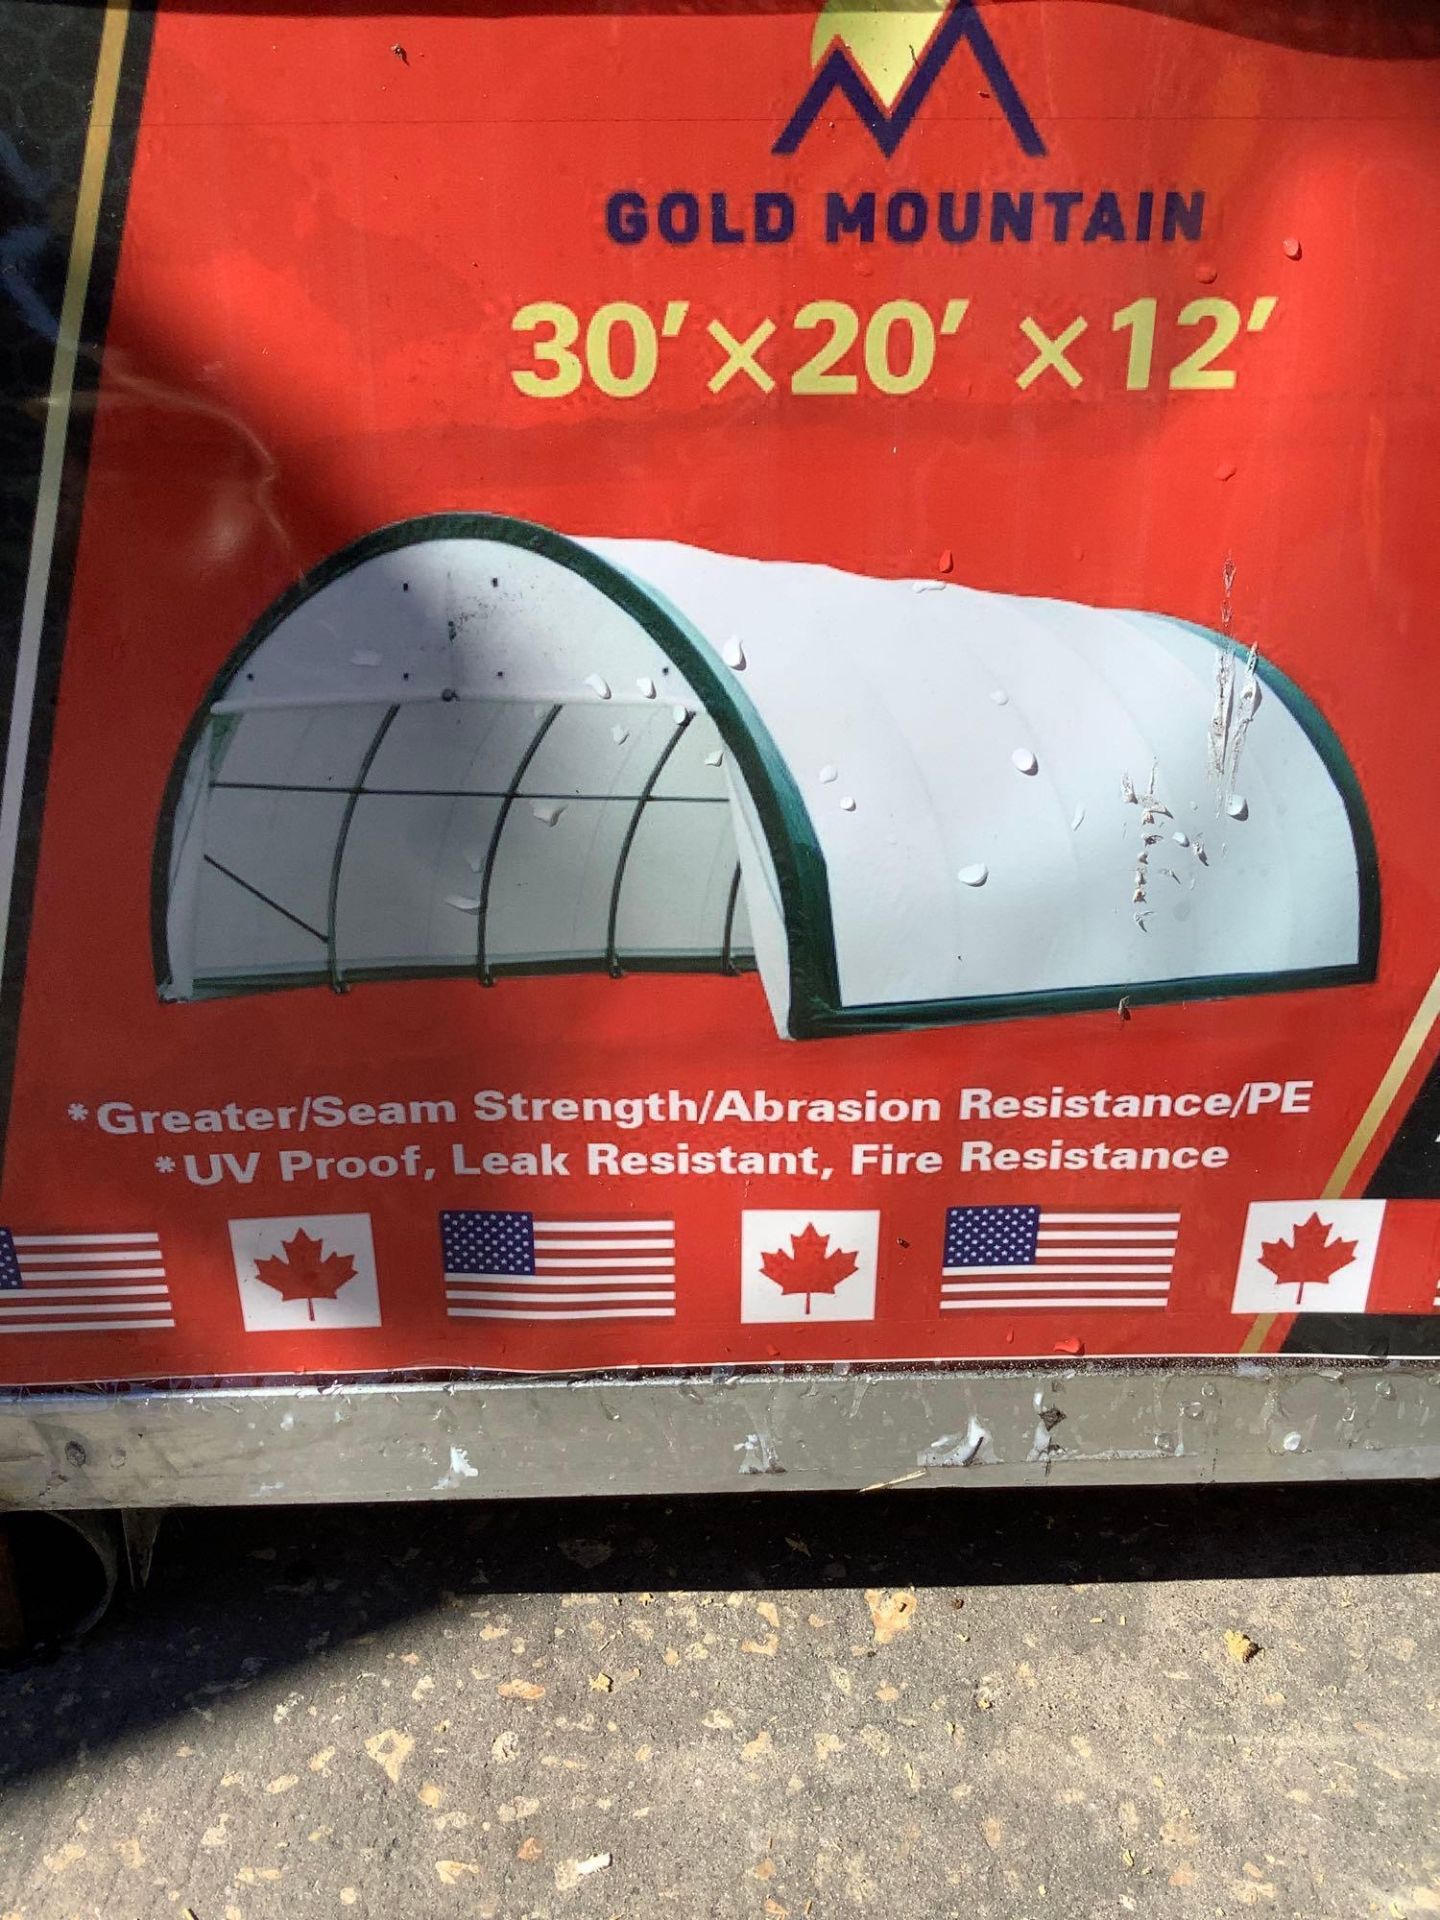 UNUSED GOLD MOUNTAIN DOME STORAGE SHELTER MODEL S203012R, APPROX 30’ x 20’ x 12’ , GREATER SEAM STRE - Image 14 of 14